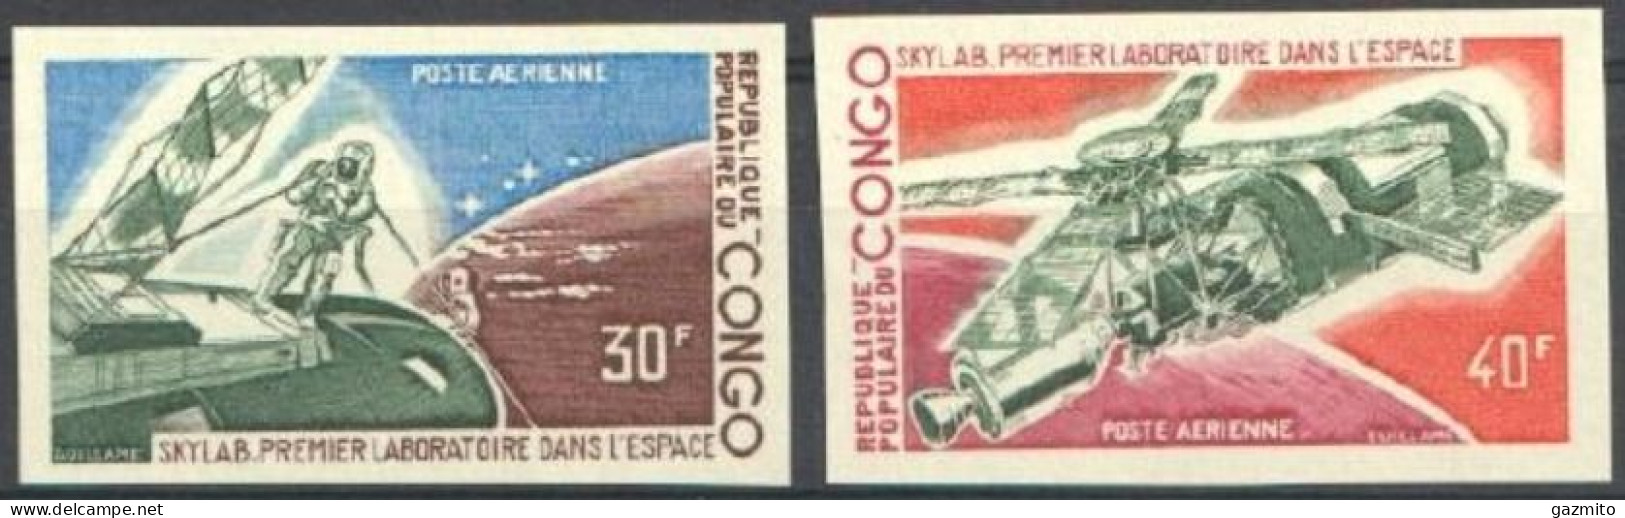 Congo Brazaville 1973, Airmail - Skylab Space Laboratory, 2val IMPERFORATED - Ungebraucht